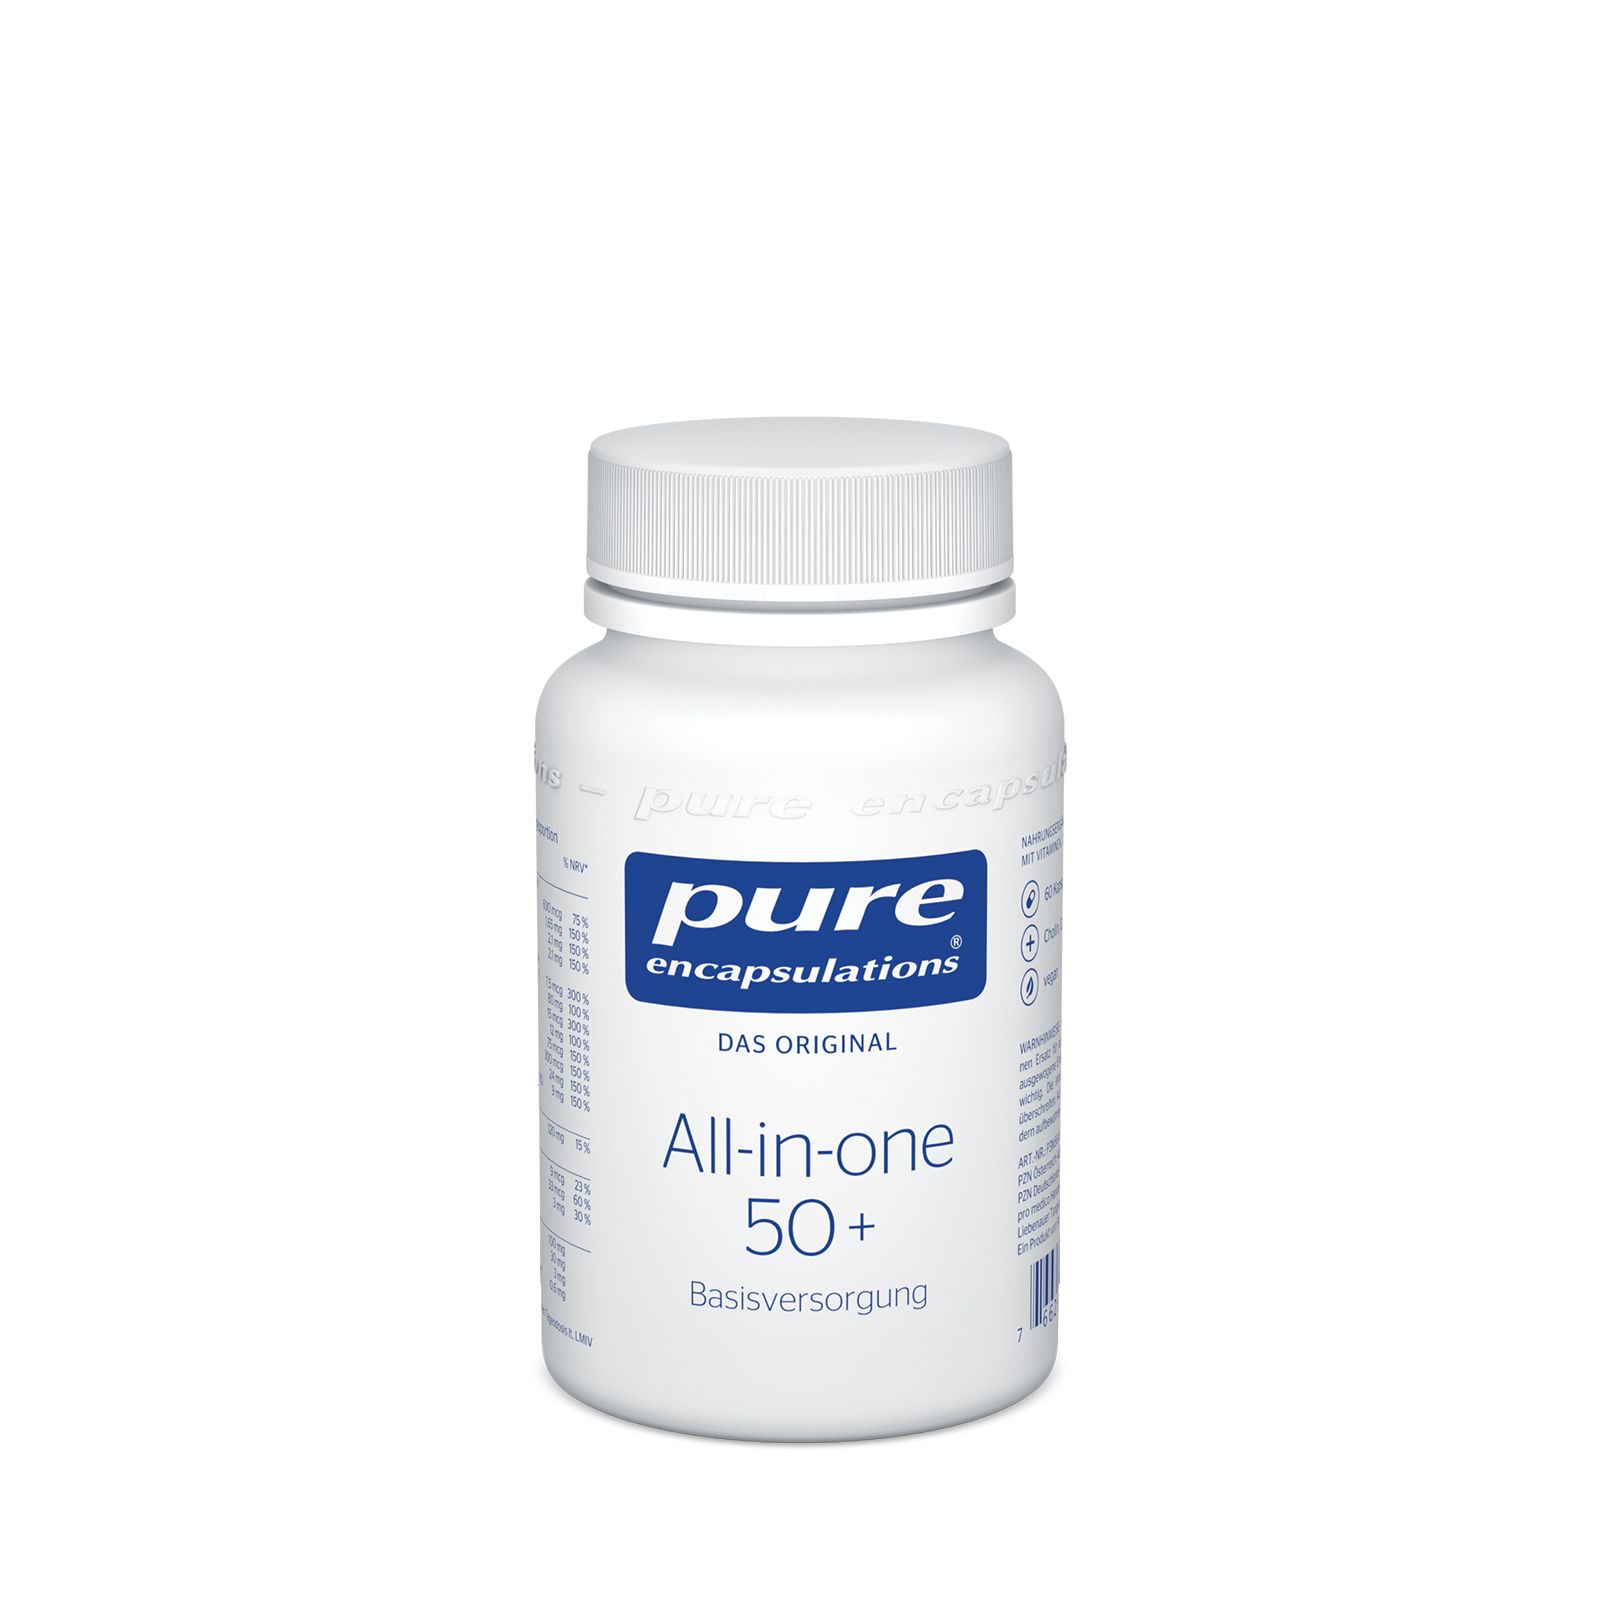 Image of Pure Encapsulations® All-in-one 50+